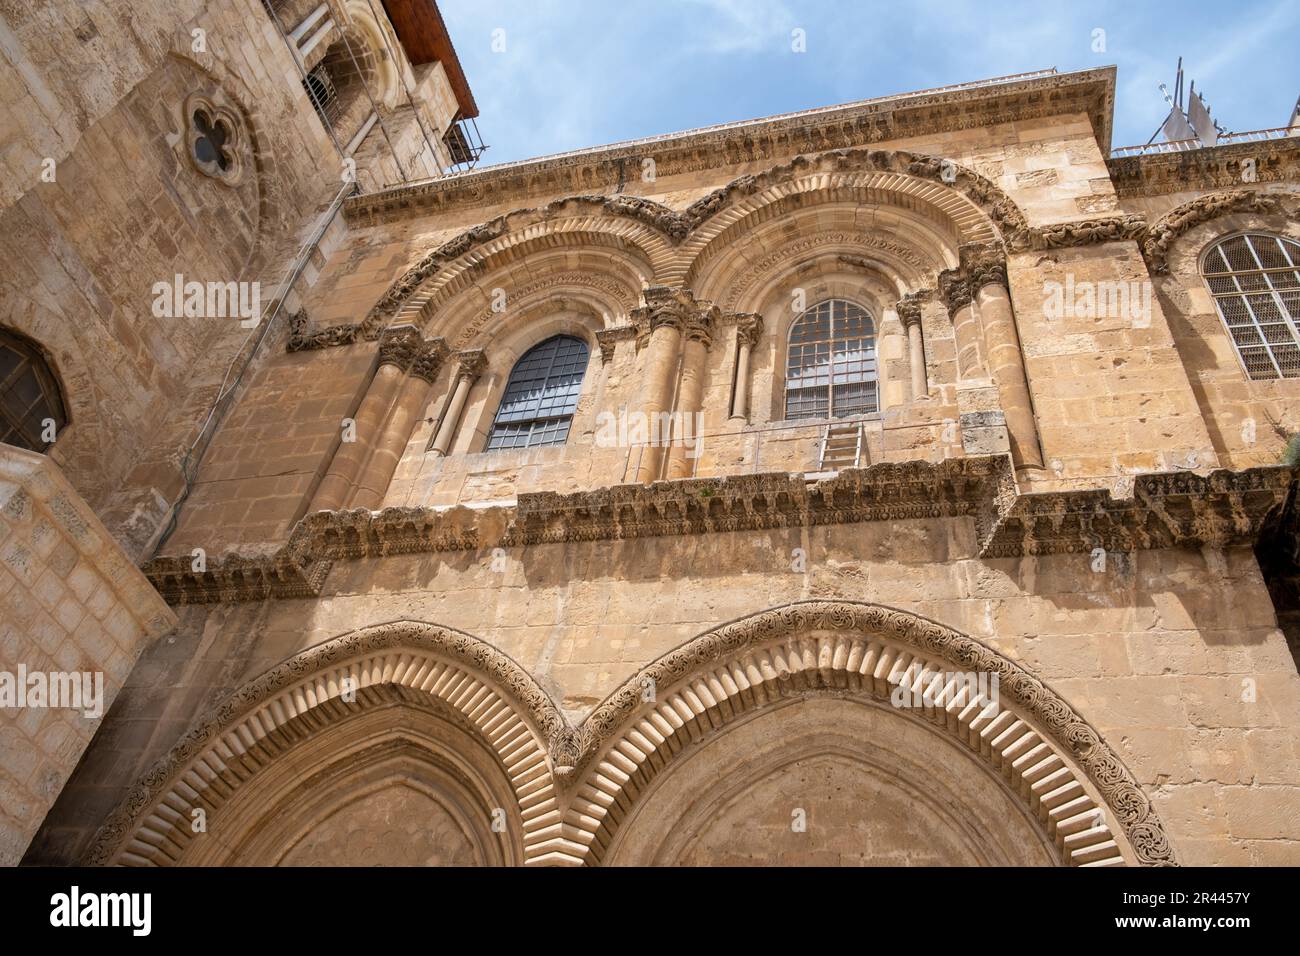 Church of Holy Sepulchre in Jerusalem, Israel. Facade detail Stock Photo